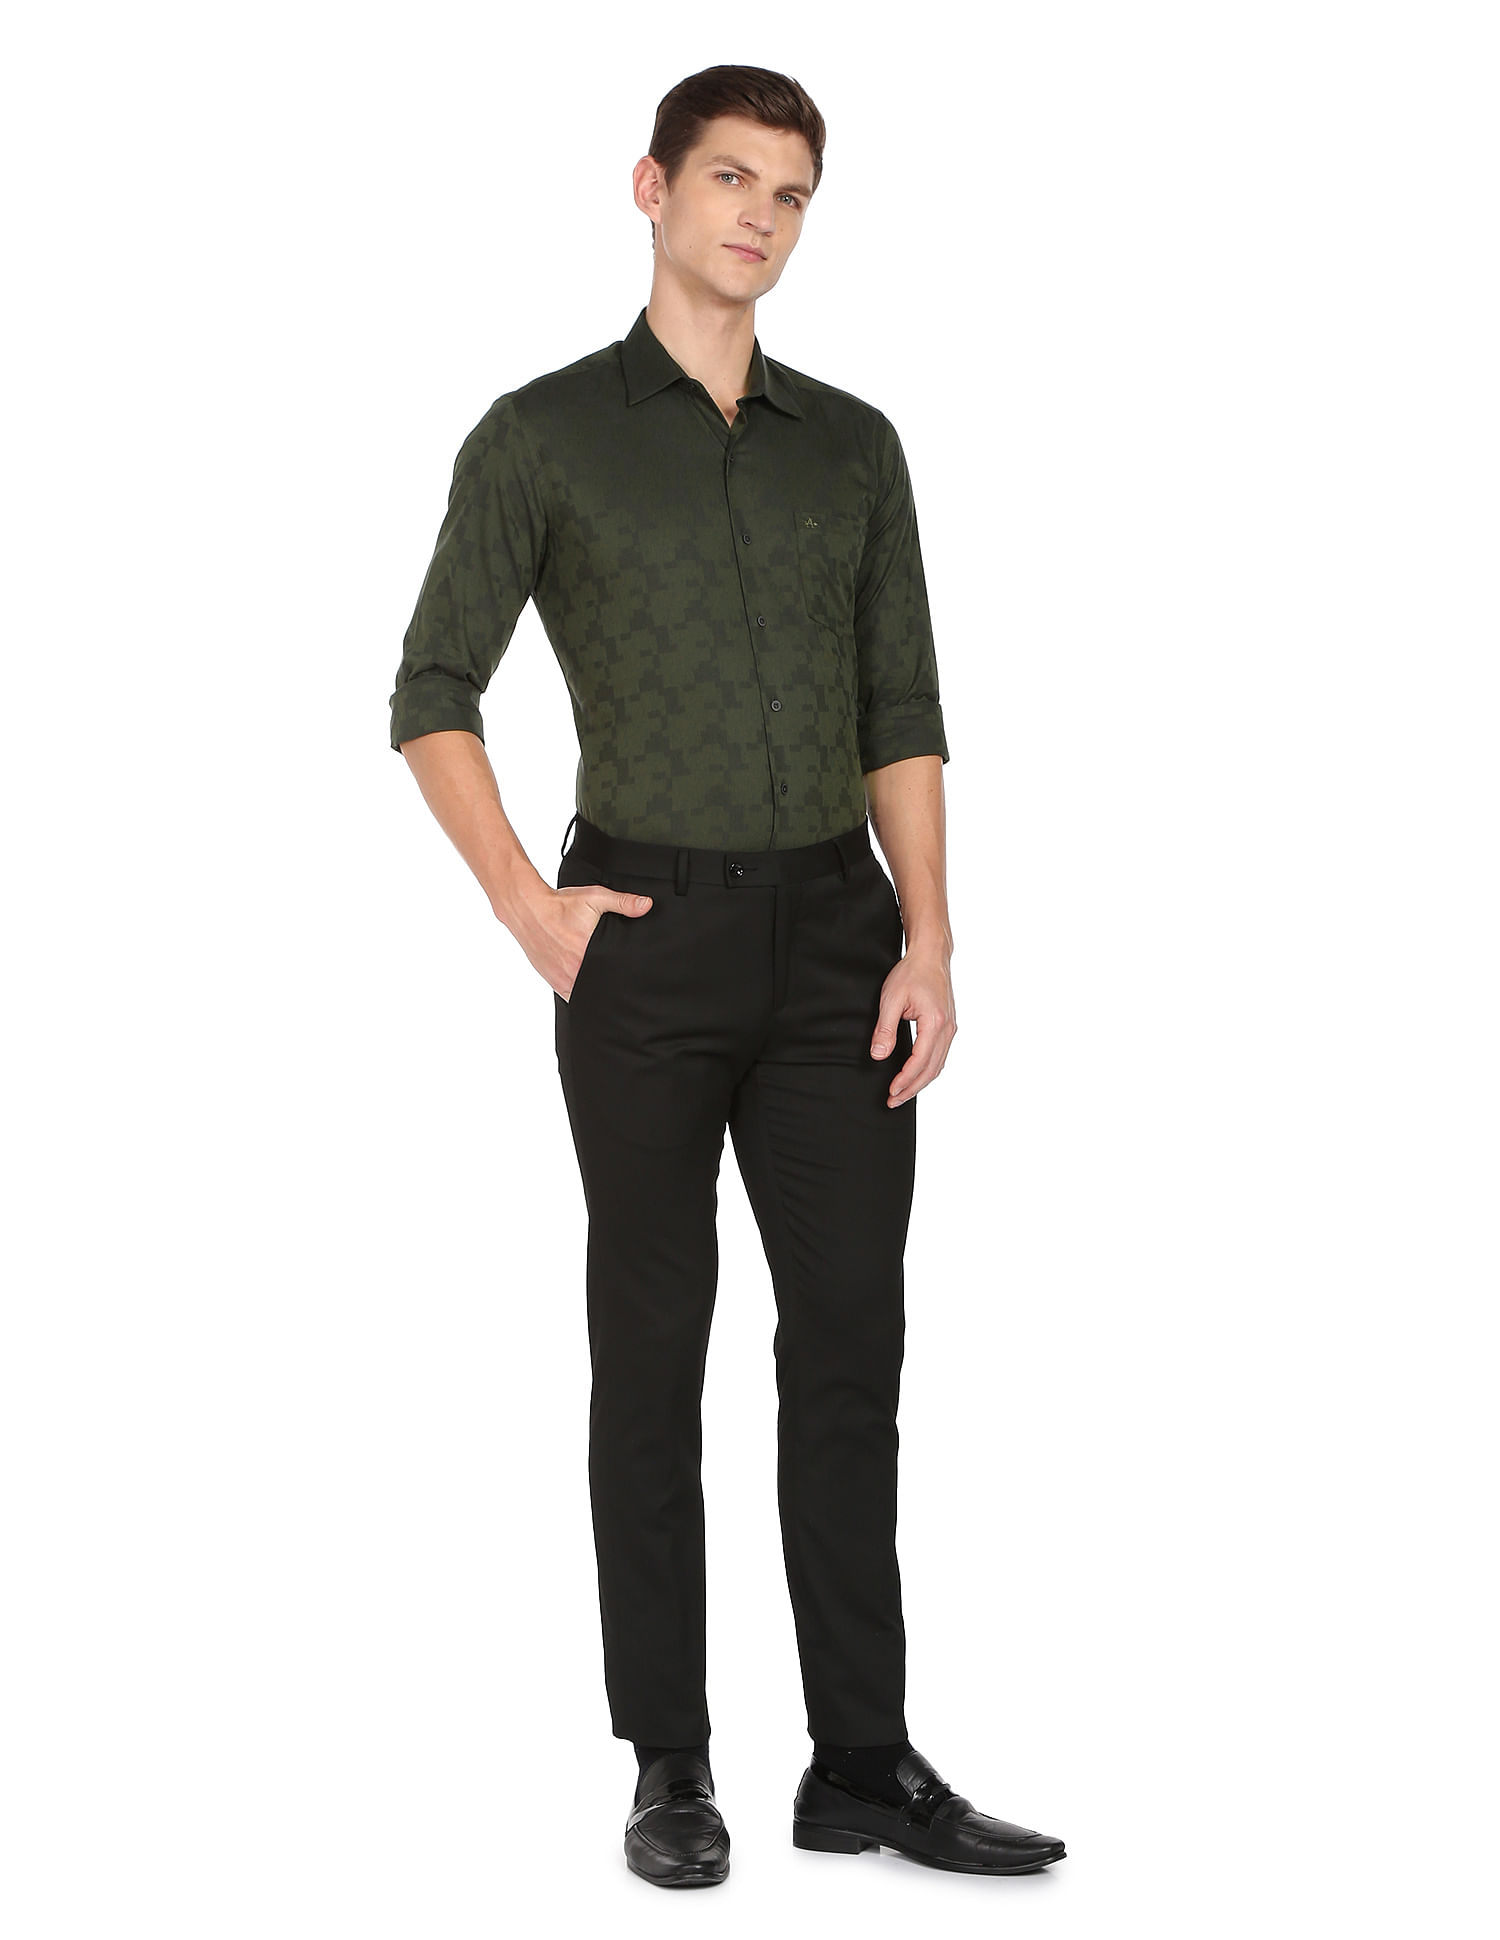 Pista Green Cutaway Collar Shirt With Check Detailing on Placket & Cuf –  archerslounge